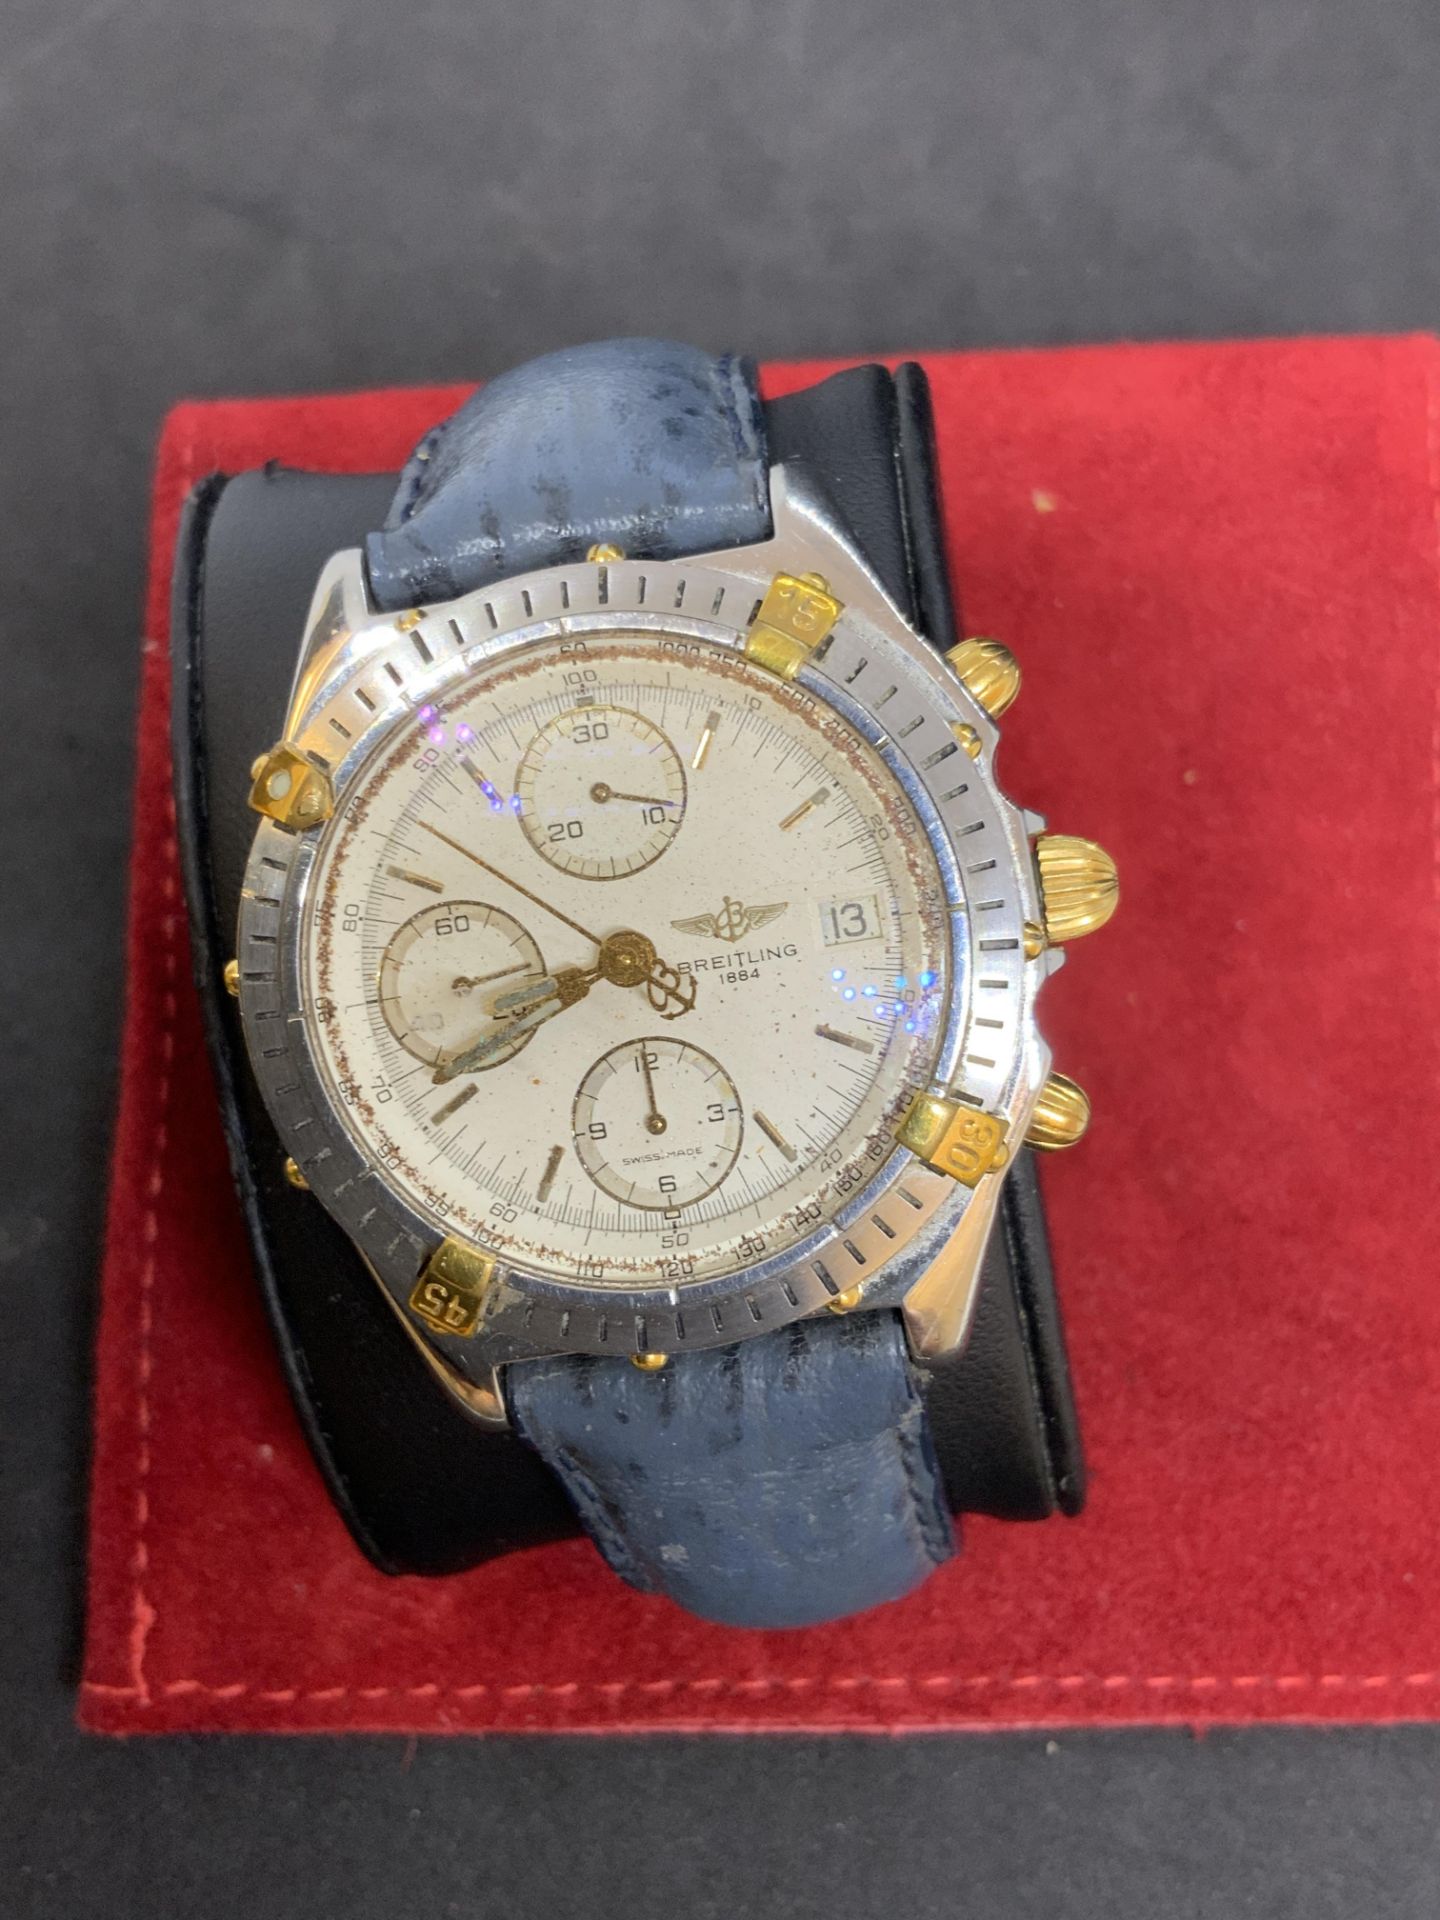 BREITLING CHRONOGRAPH WATCH - Image 5 of 5